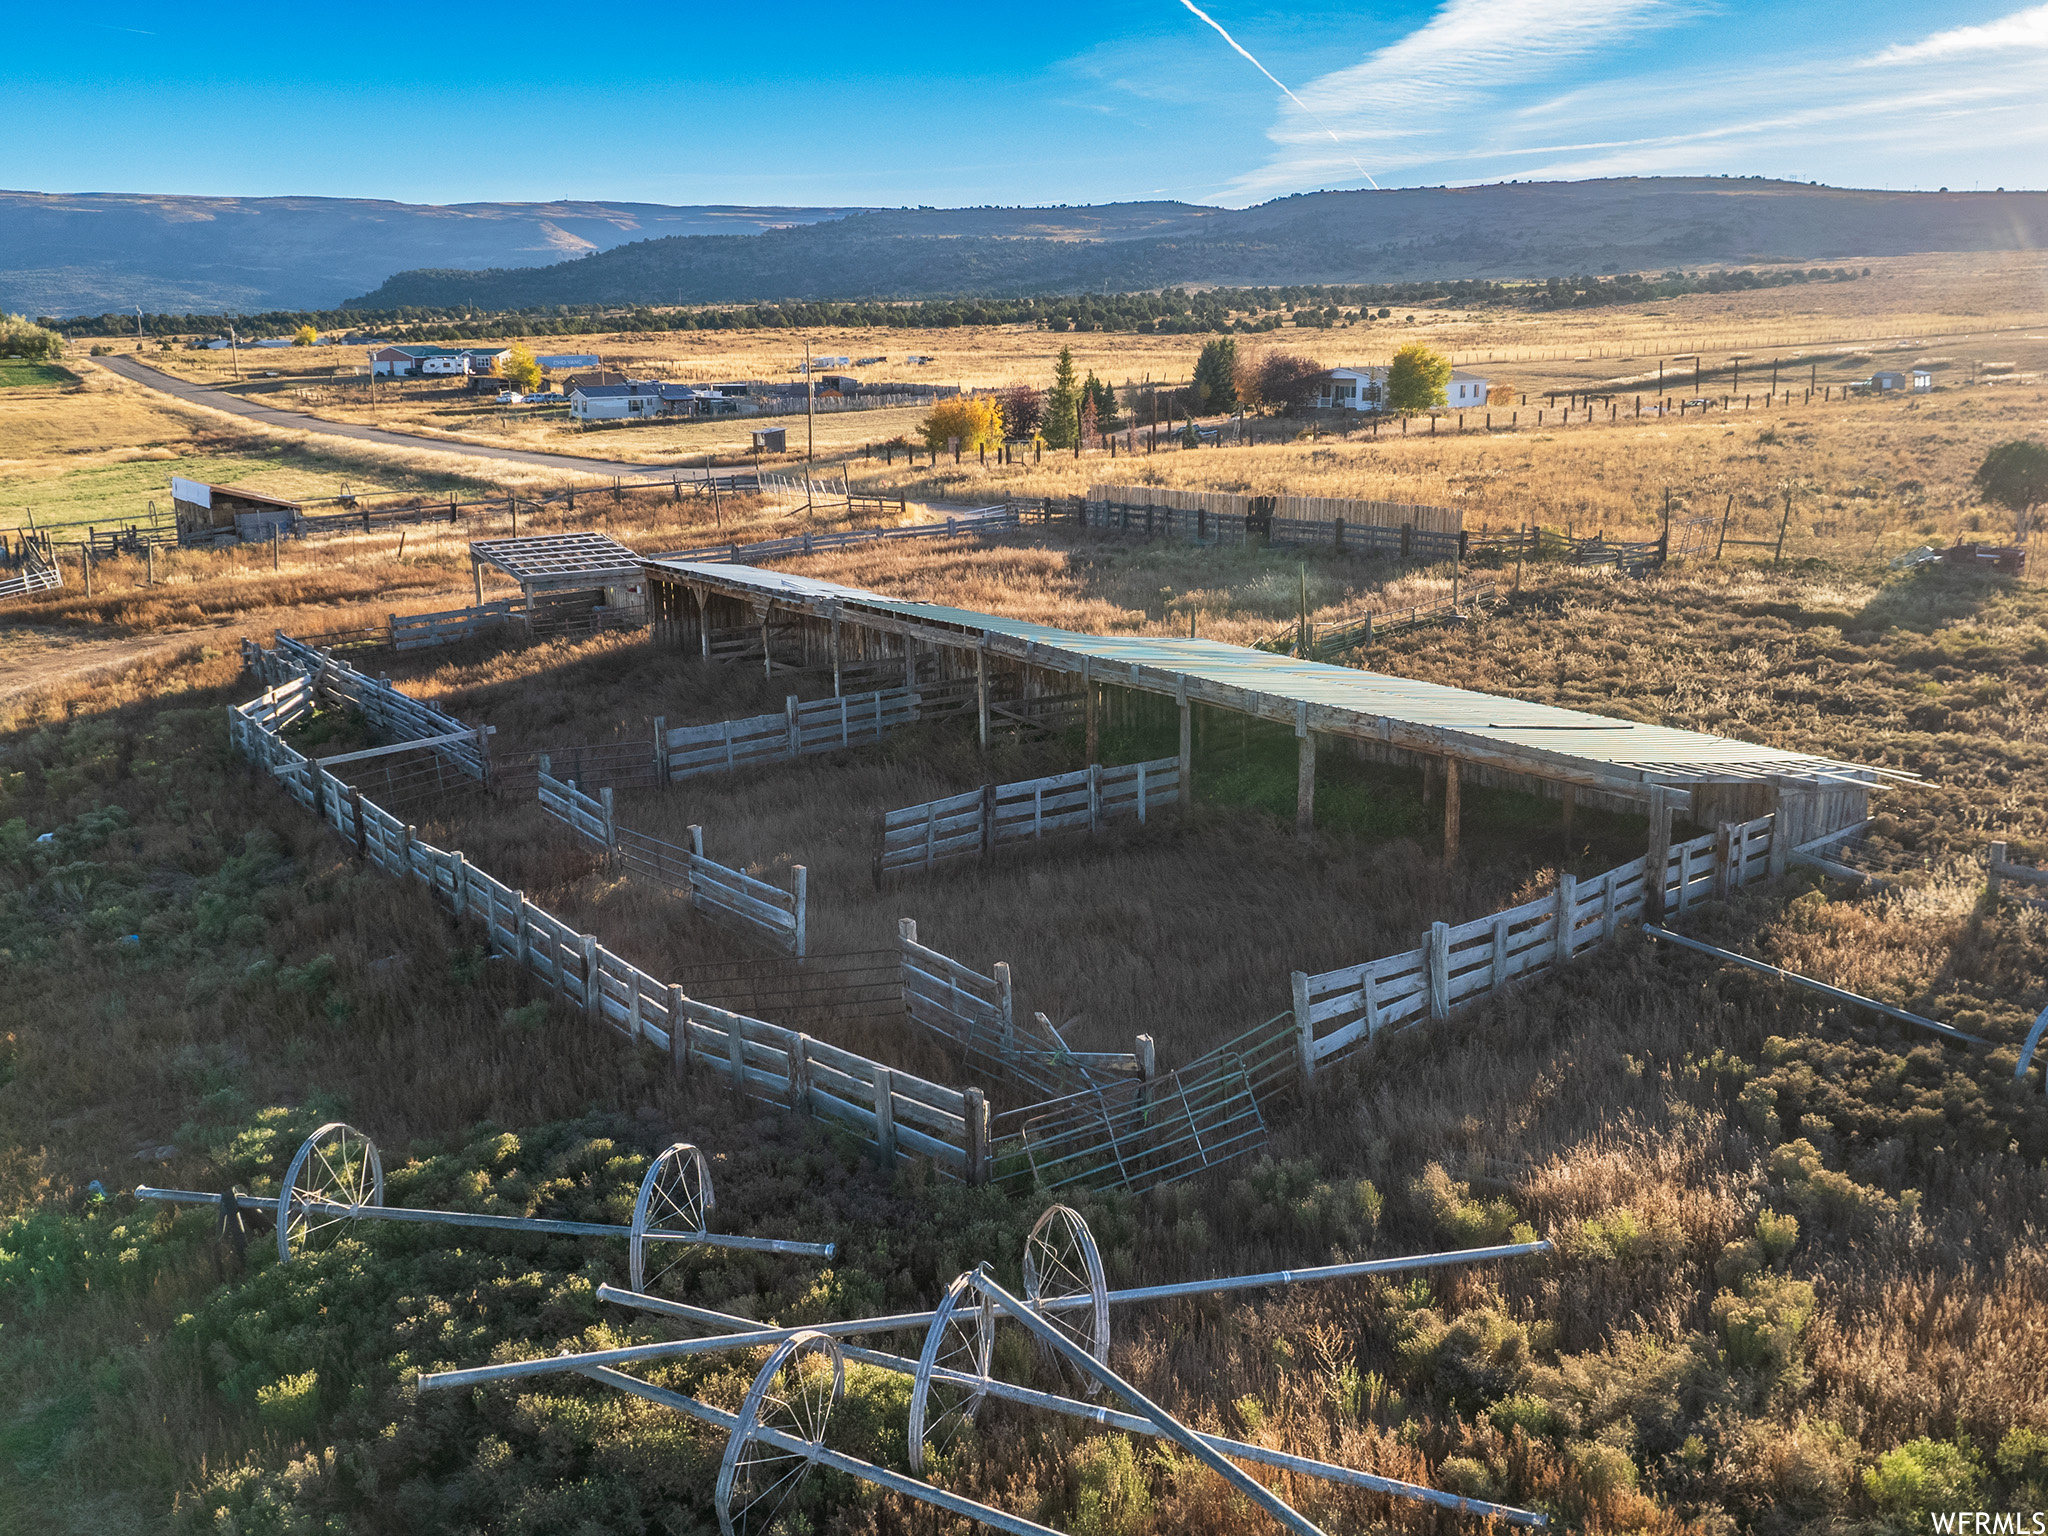 25 YR OWNER FINANCE AVAILABLE: View of farm ground with a rural view and a mountain view. Includes irrigation water and wheel lines. Additional land available. Call listing brokerage for details.